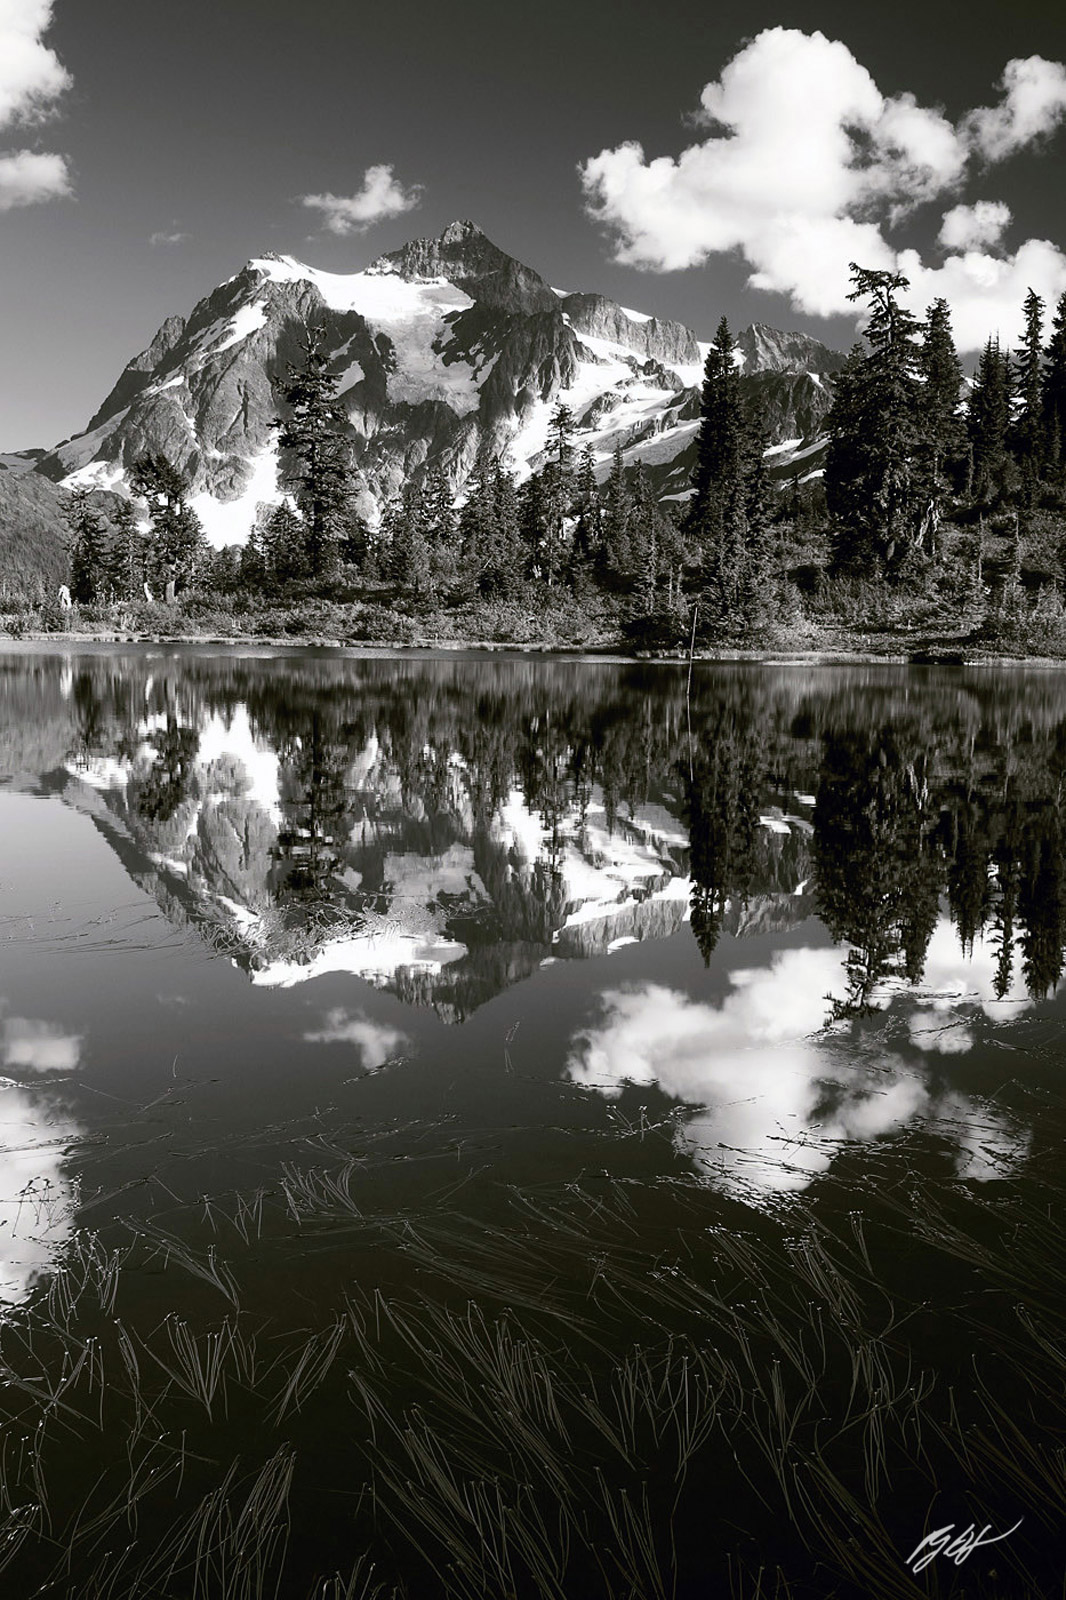 Mt Shuksan Reflected in Picture Lake in Heather Meadows in the Mt Baker National Recreation Area in Washington